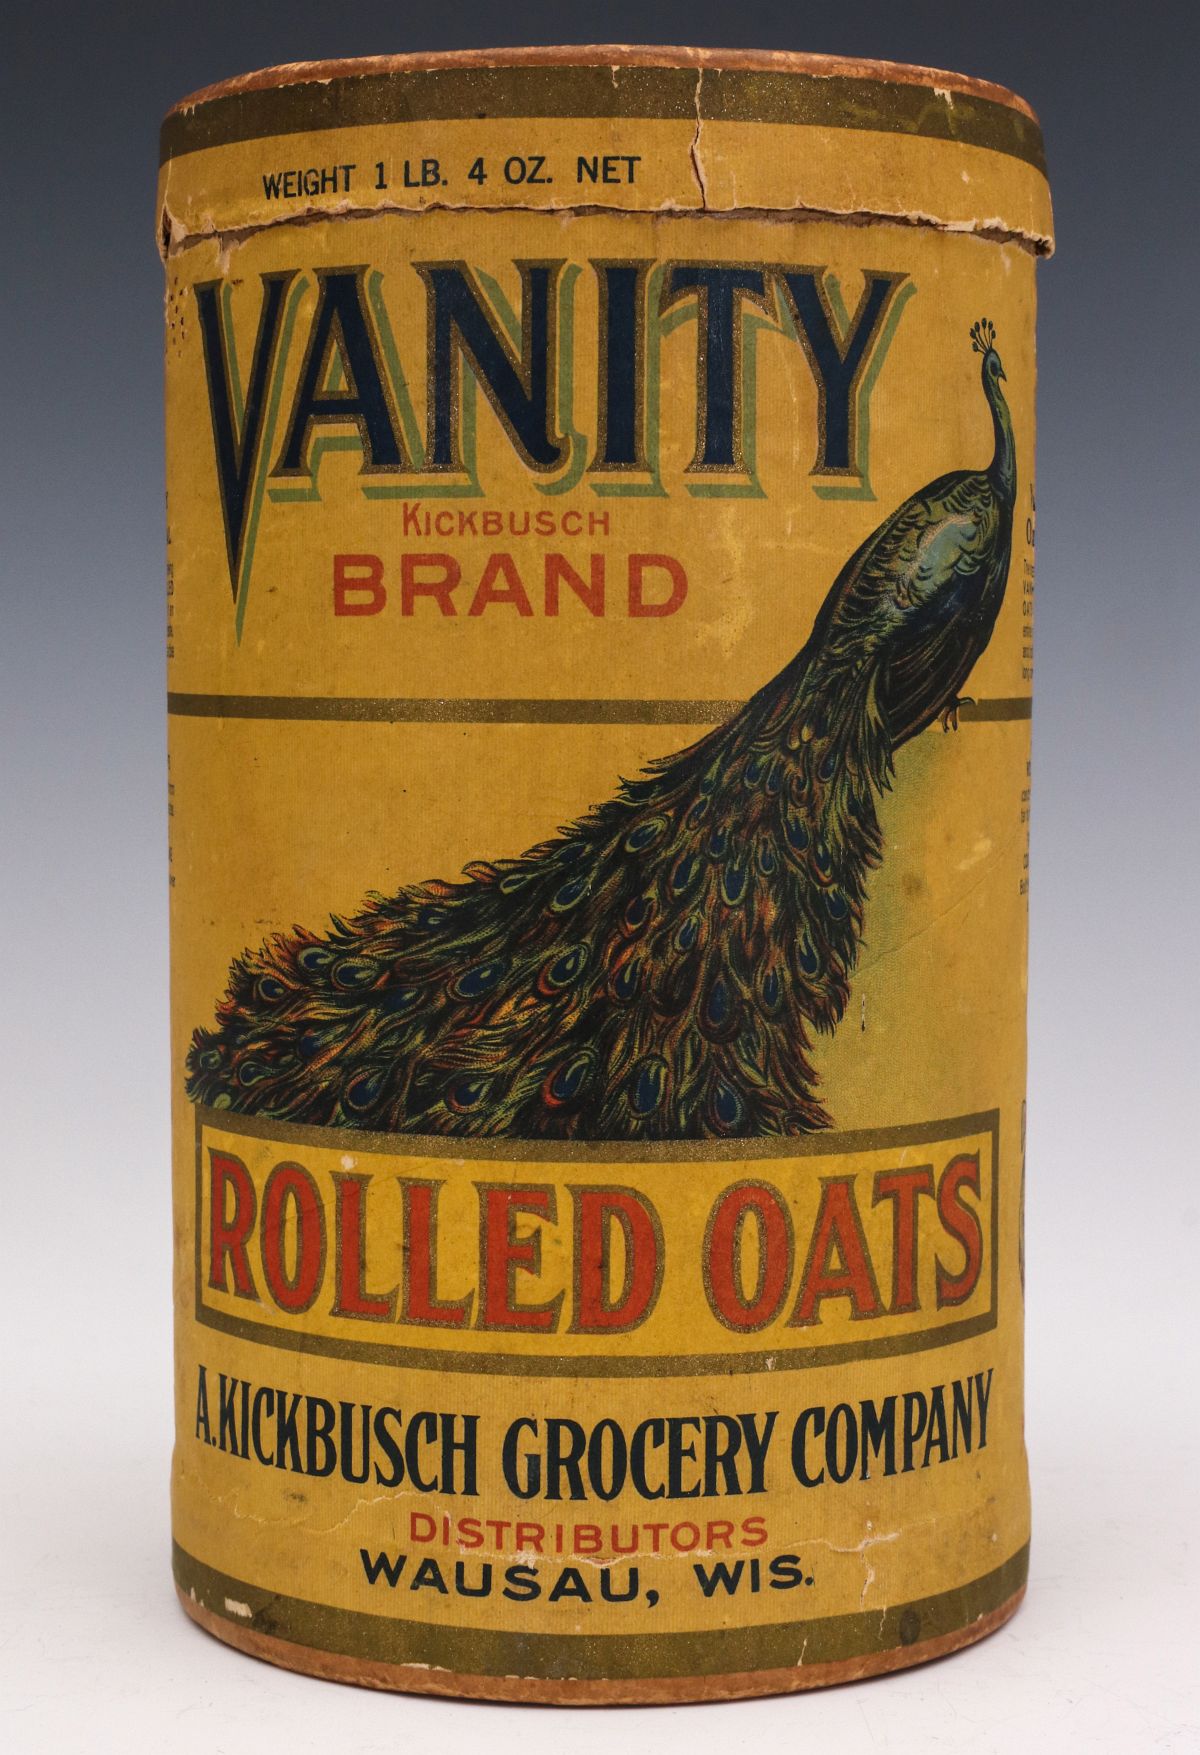 KICKBUSCH GROCERY VANITYBRAND ROLLED OATS CANISTER